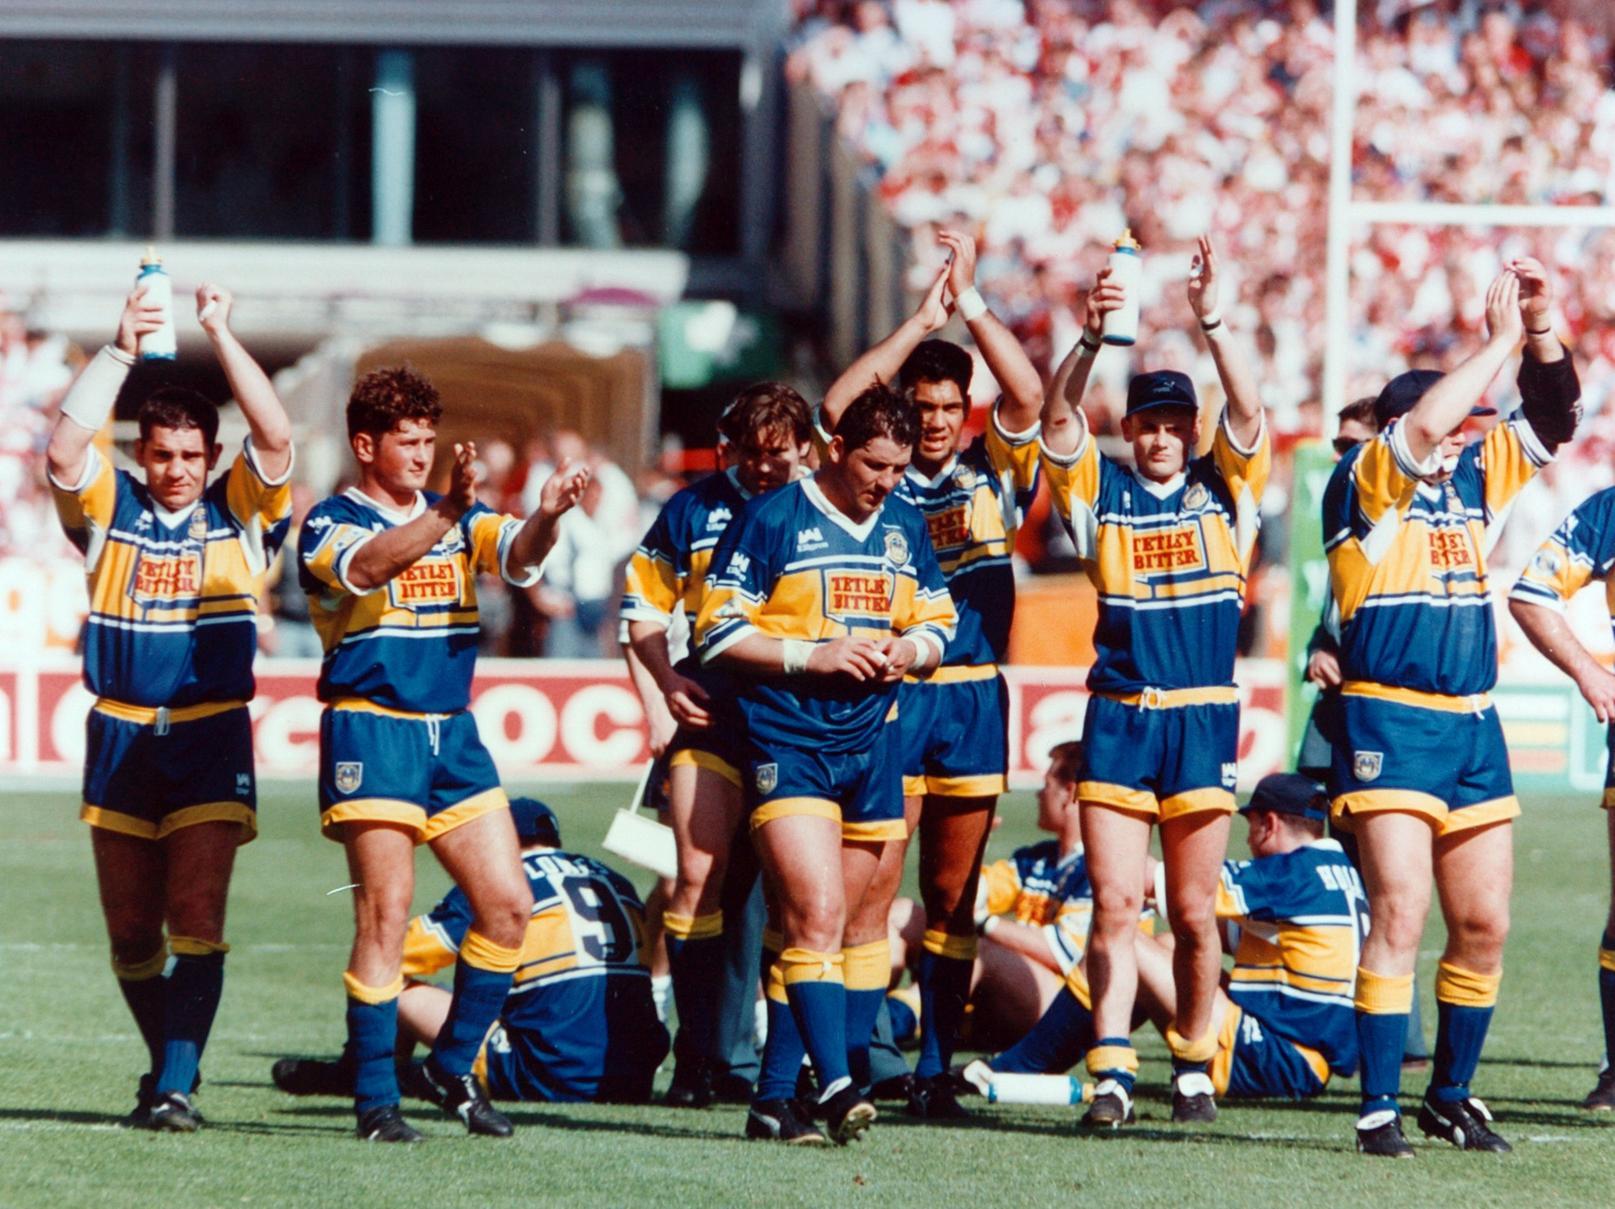 A disappointed Leeds RL team applaud their fans after defeat in the Silk Cut Challenge Cup against Wigan.